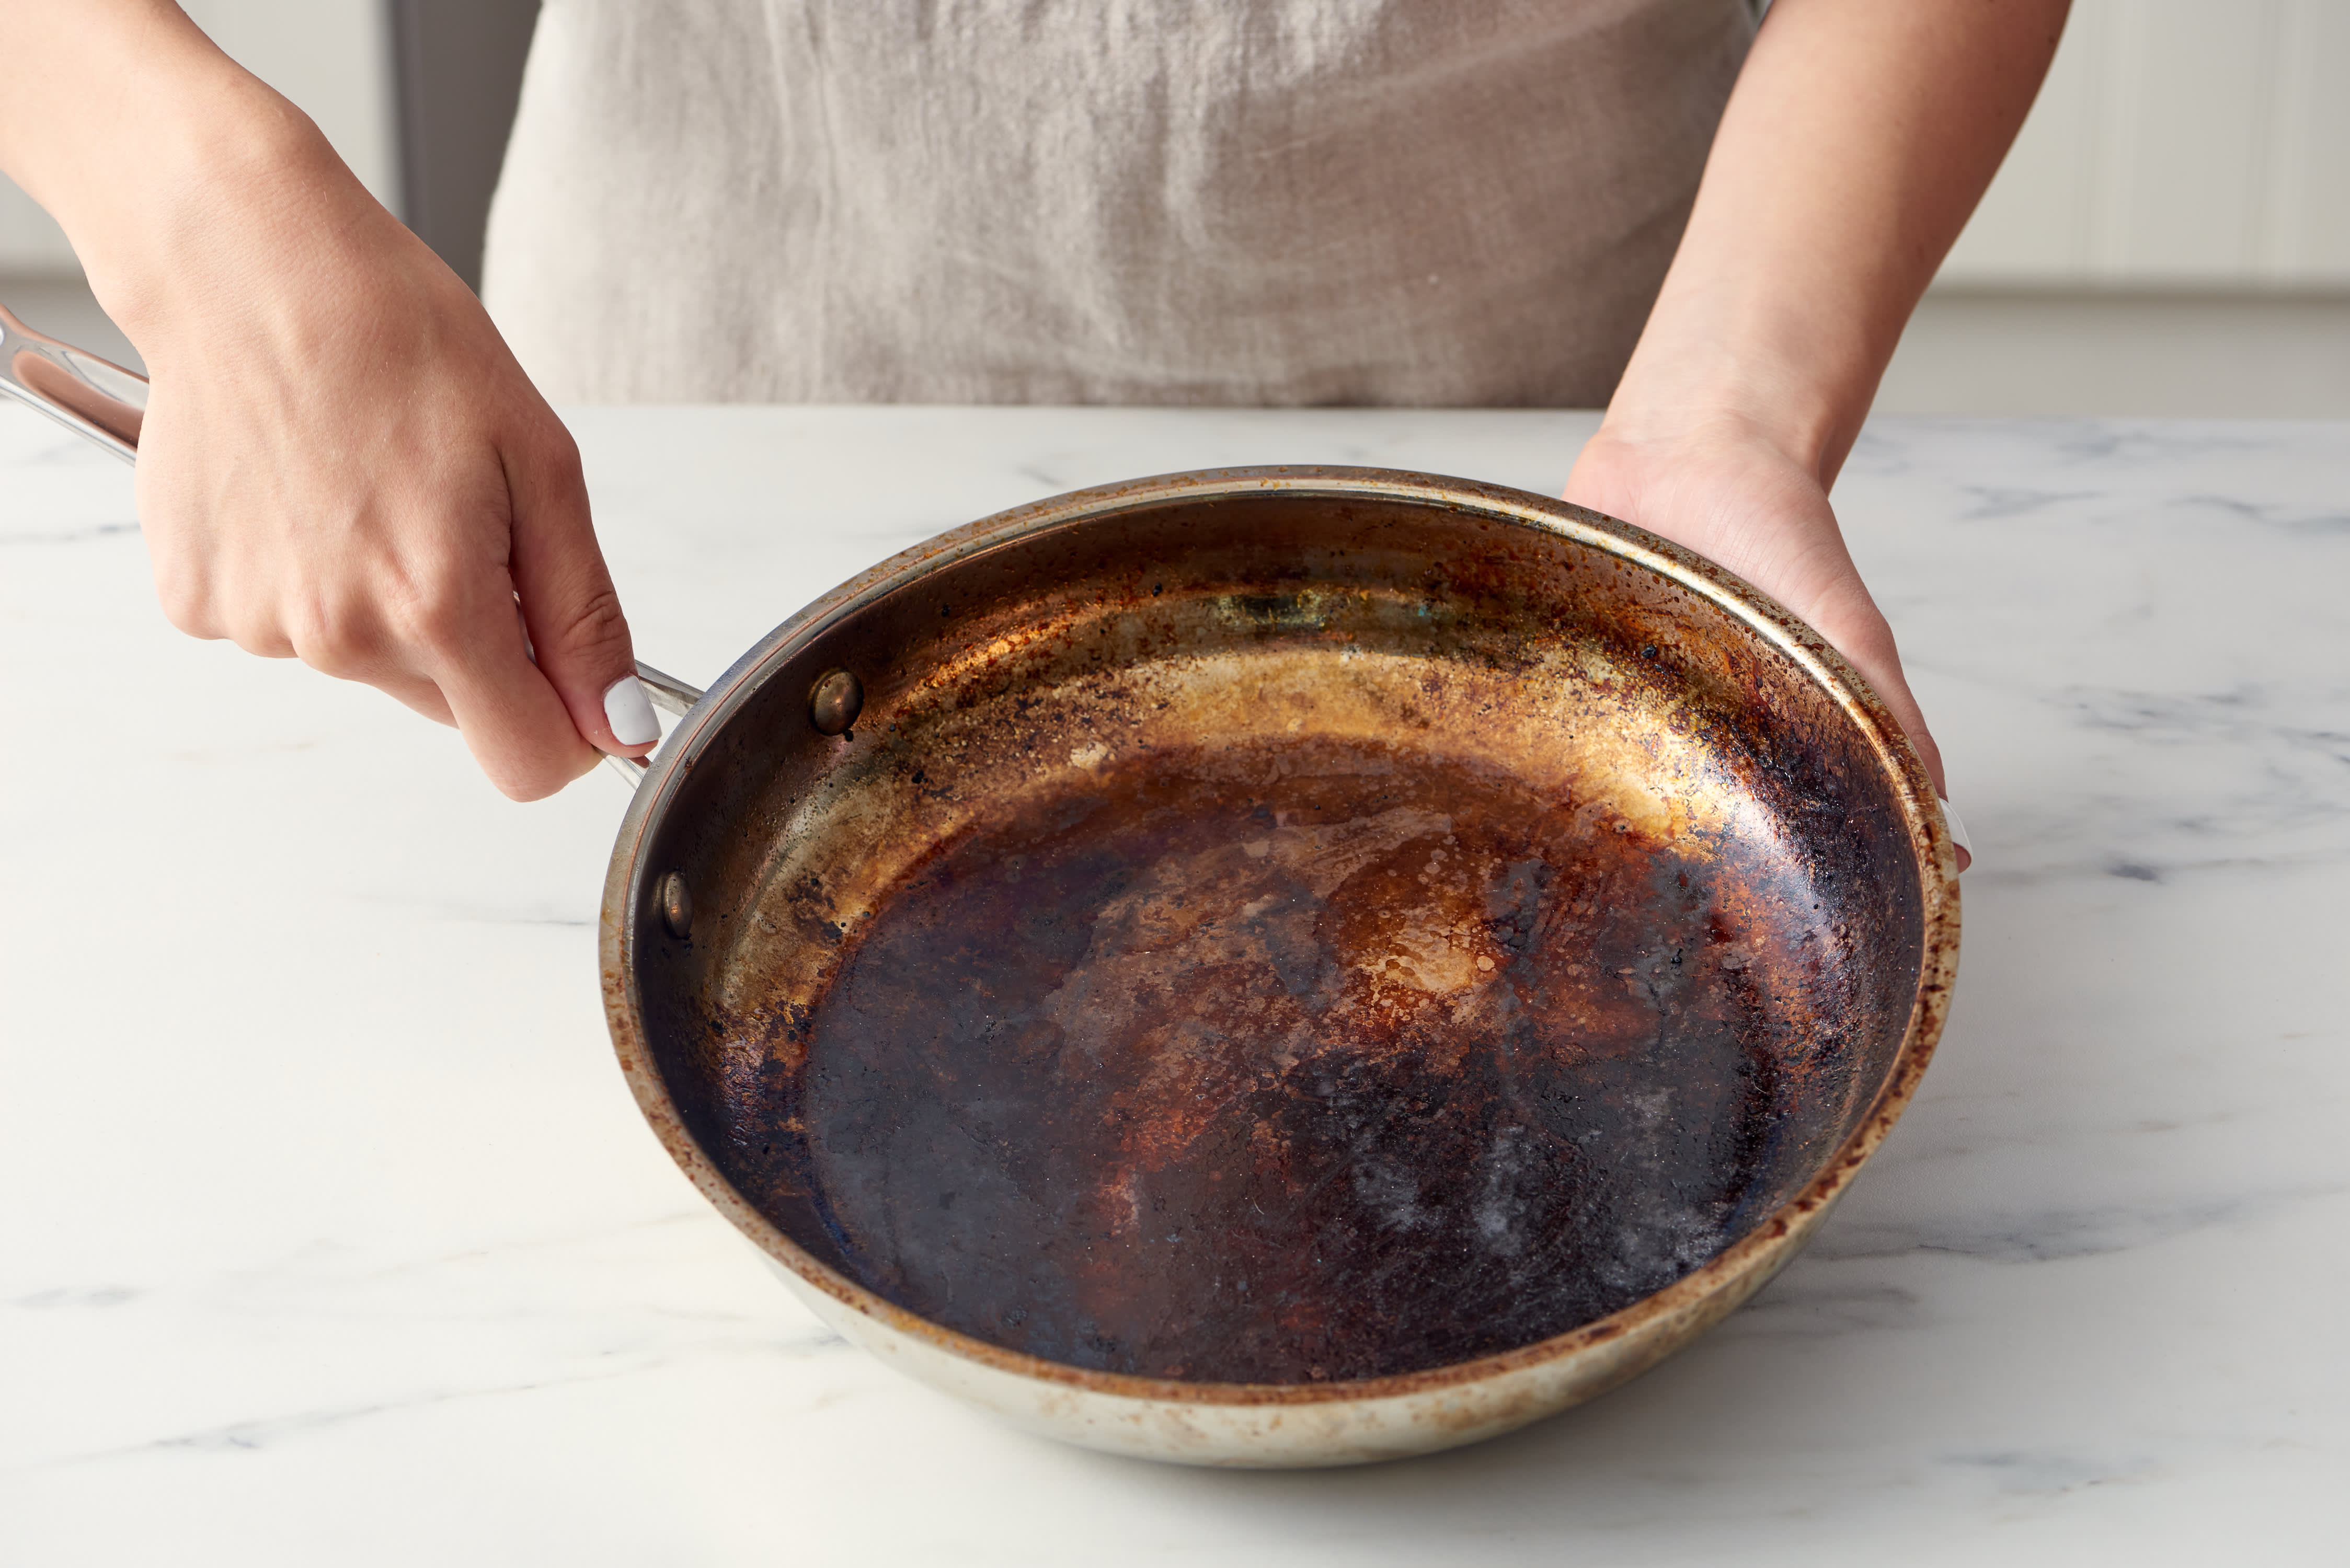 How to Clean Stainless-Steel Pans to Keep Them Looking Brand-New